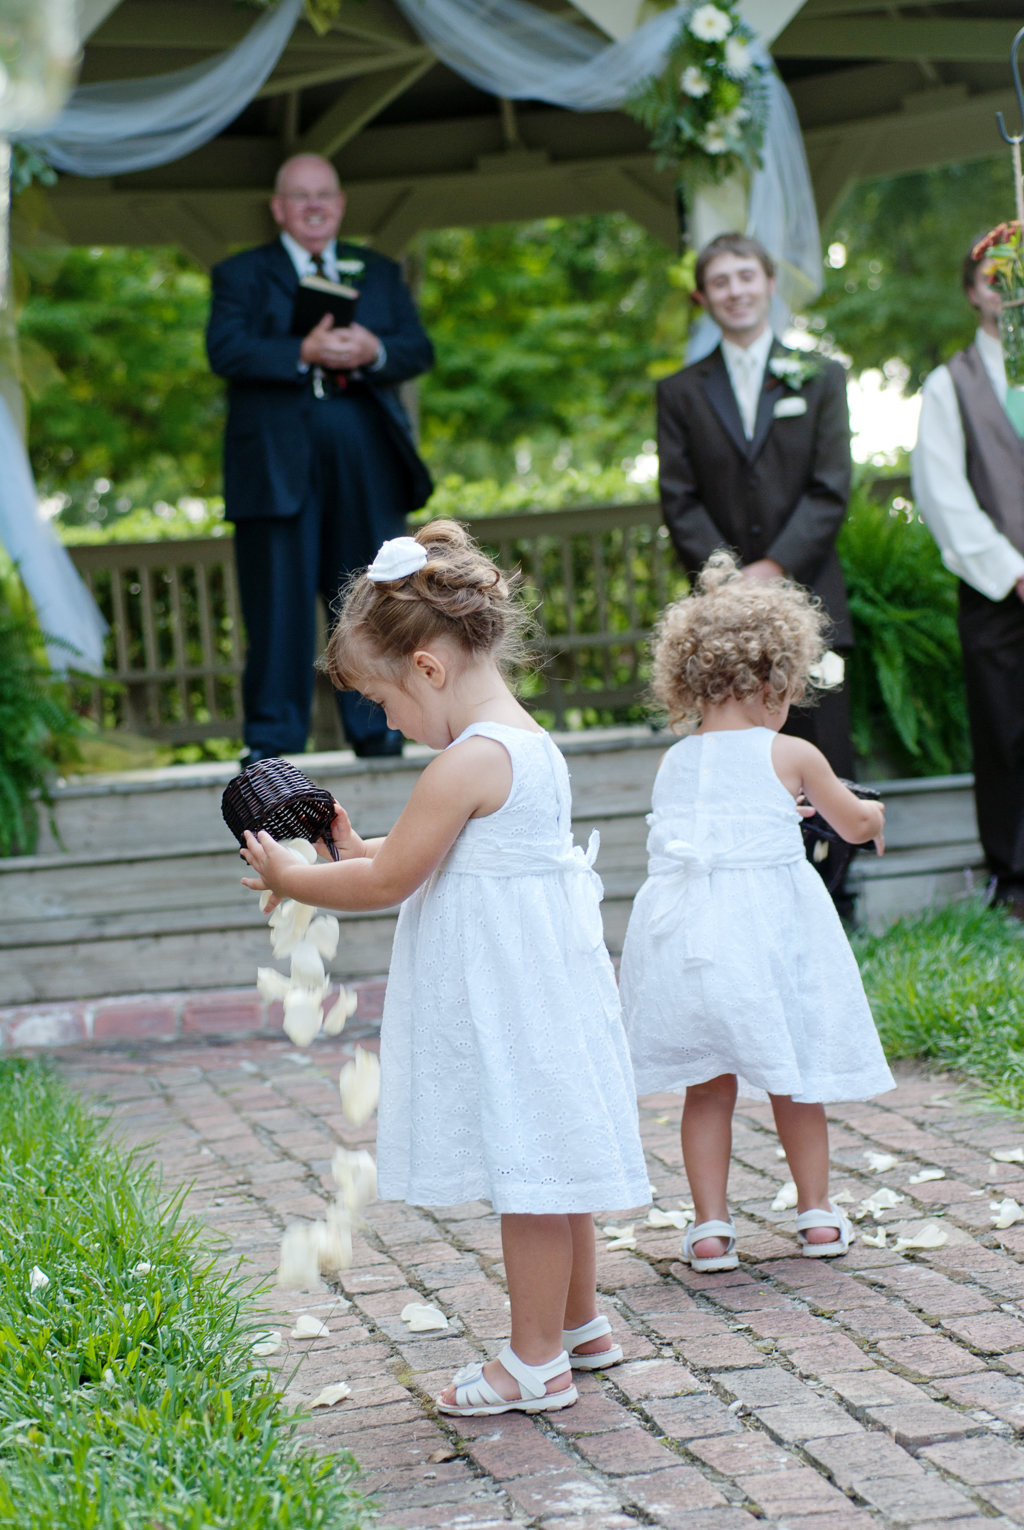 flower girls pour flowers out of baskets at front of ceremony aisle